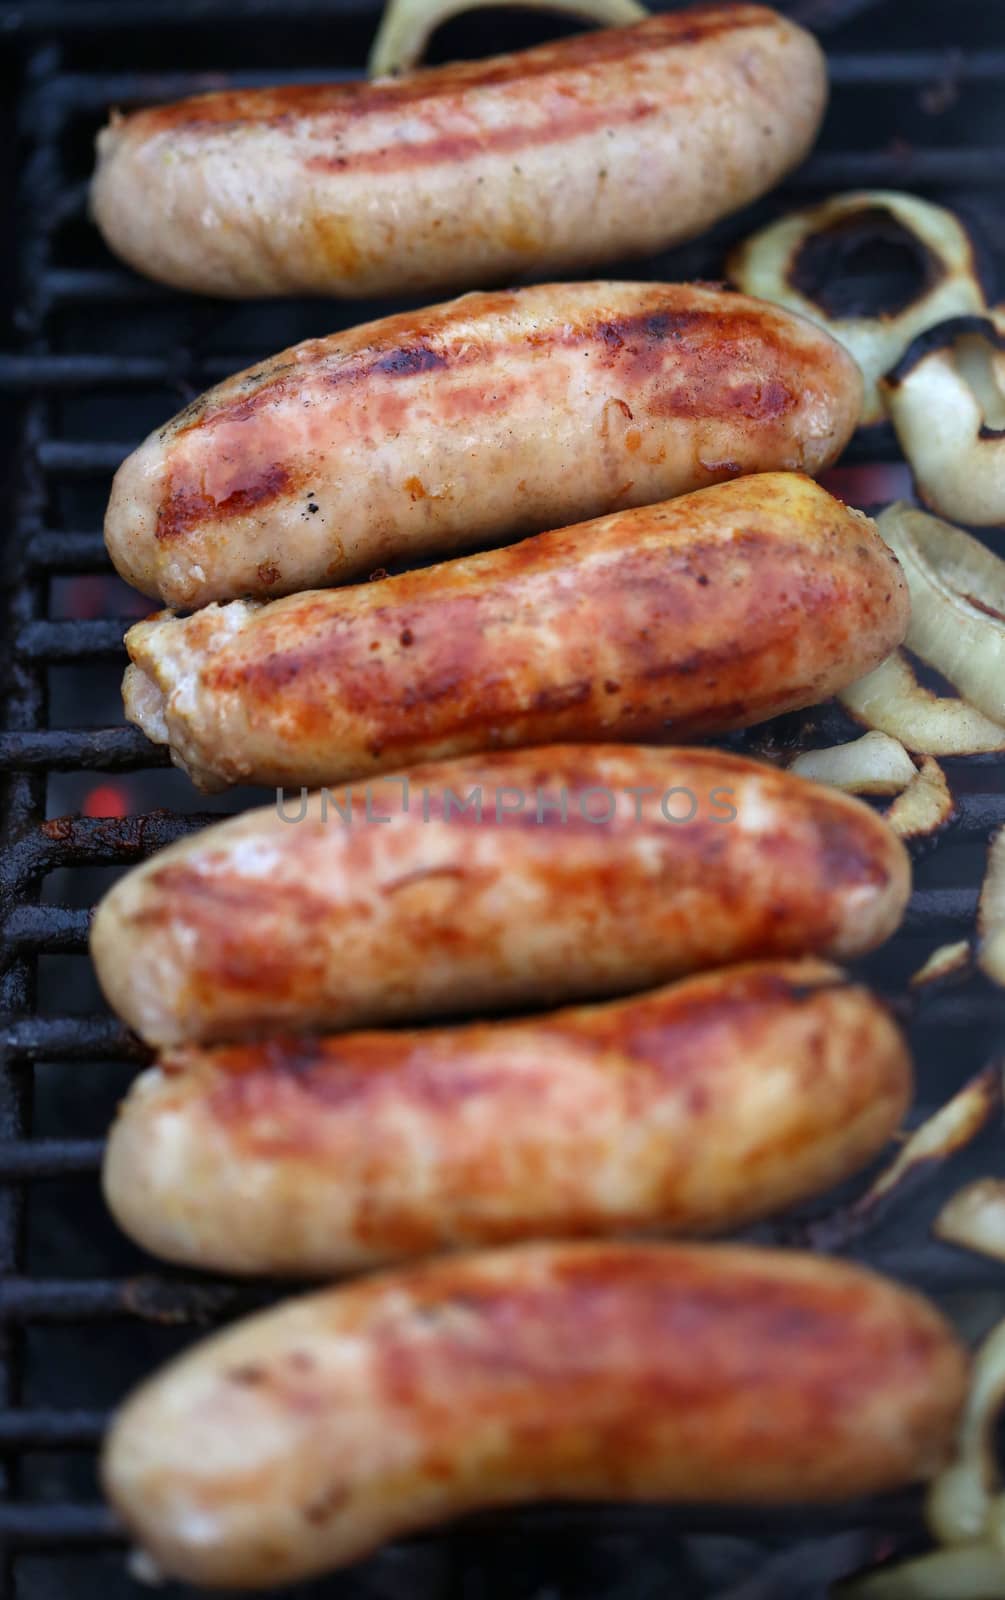 Sausages on grill with onions by indigolotos